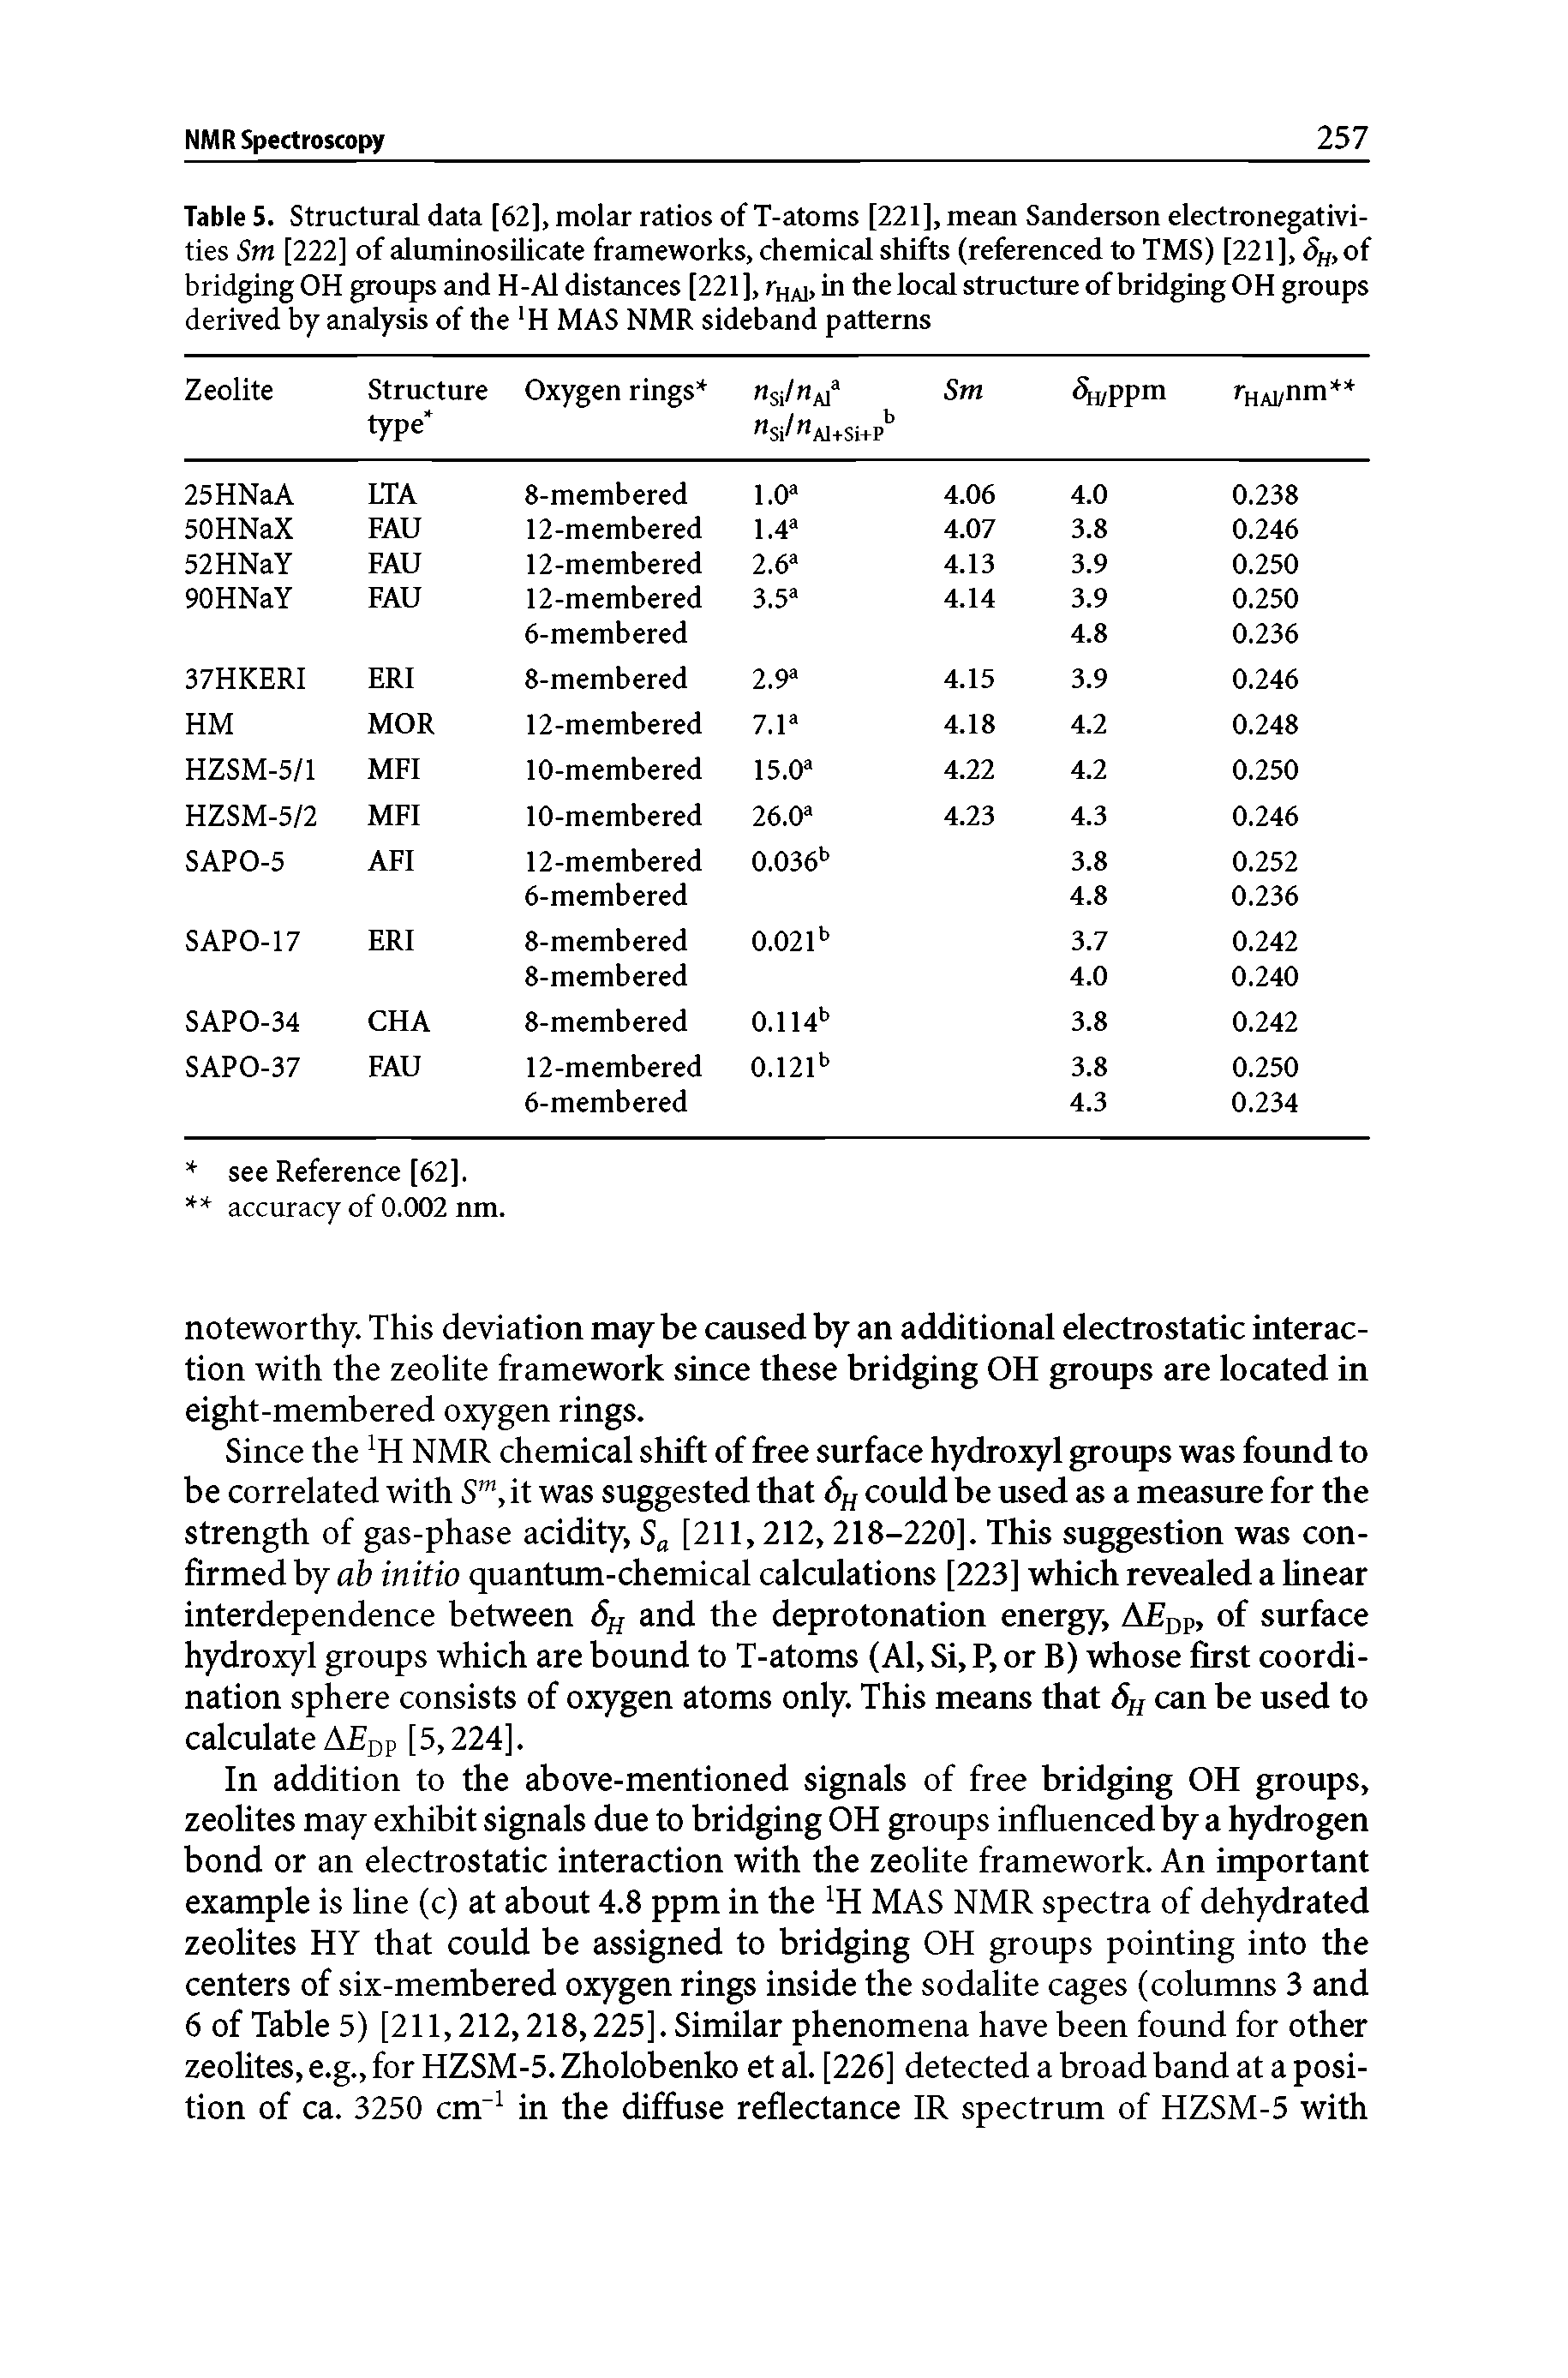 Tables. Structural data [62], molar ratios of T-atoms [221], mean Sanderson electronegativities Sm [222] of aluminosilicate frameworks, chemical shifts (referenced to TMS) [221], 8n, of bridging OH groups and H-Al distances [221 ], Thai, in the local structure of bridging OH groups derived by analysis of the H MAS NMR sideband patterns ...